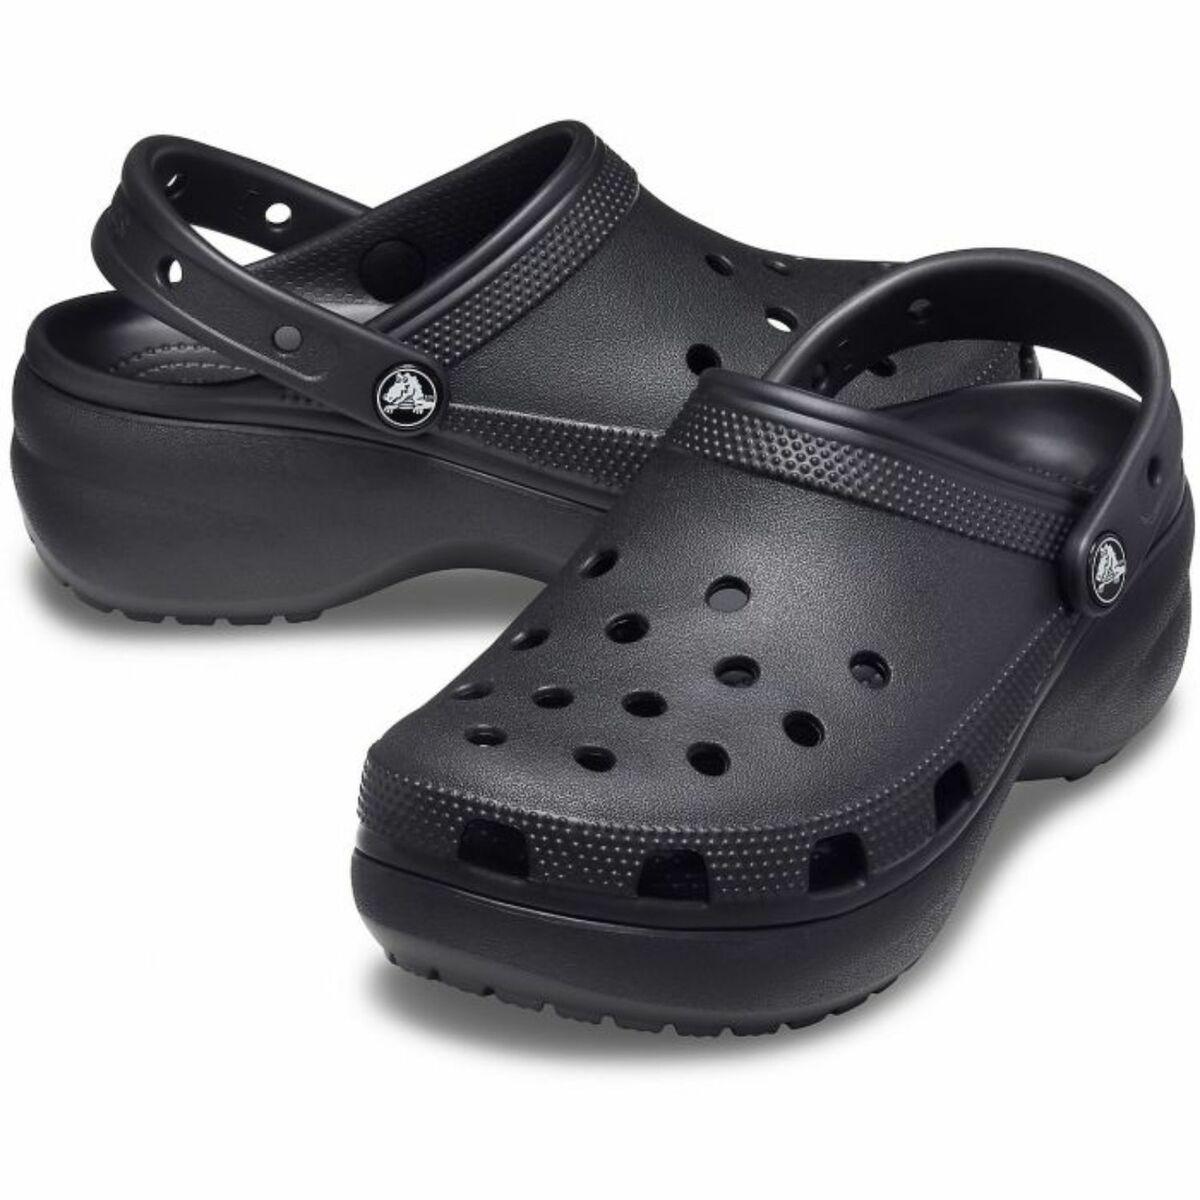 Crocs Sandals For Men, Women And Kids At Official Online India Store - Crocs™  India